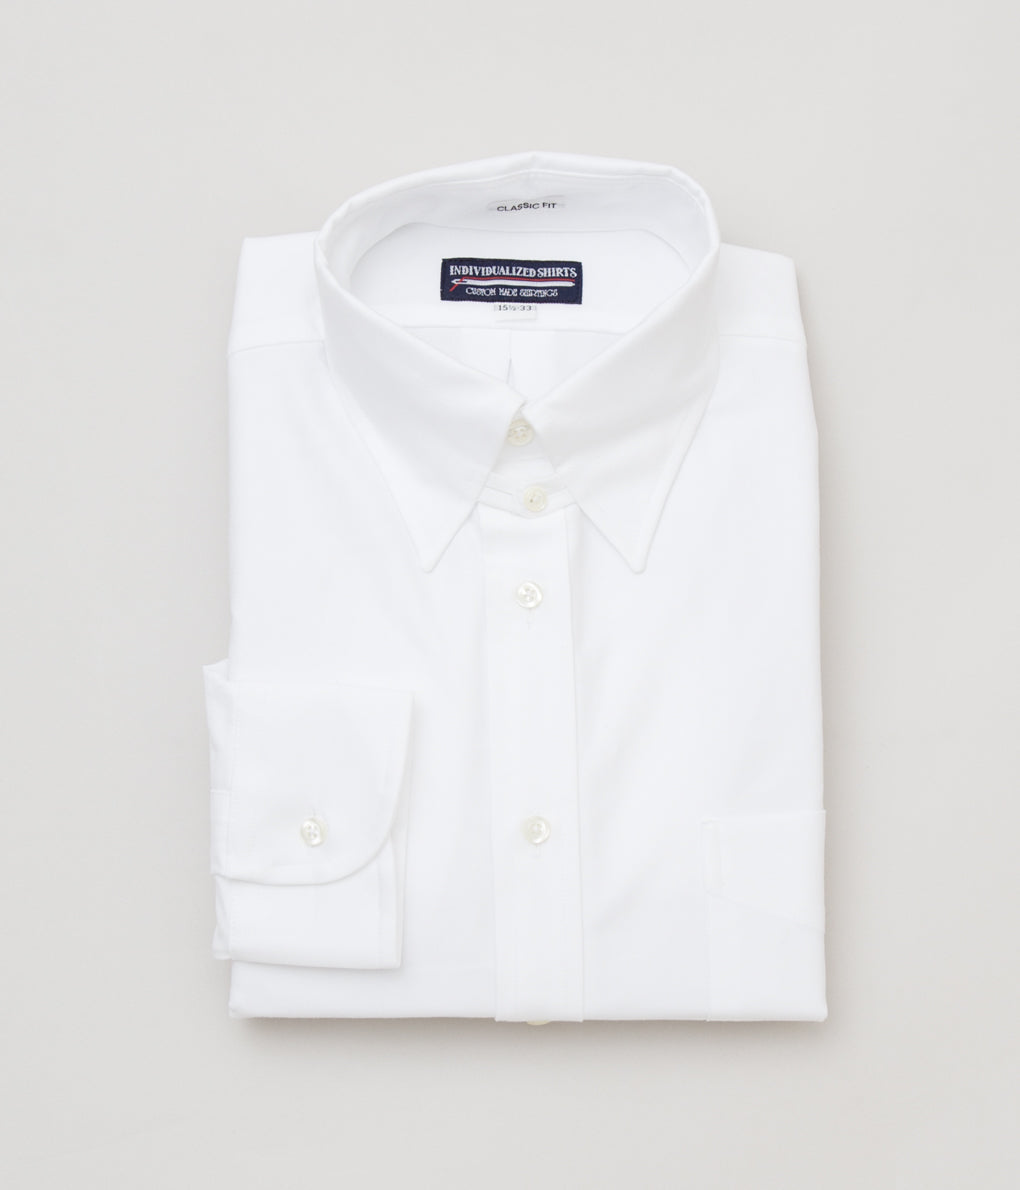 INDIVIDUALIZED SHIRTS "CAMBRIDGE OXFORD HERITAGE COLLECTION TAB COLLAR SHIRT(WHITE)"